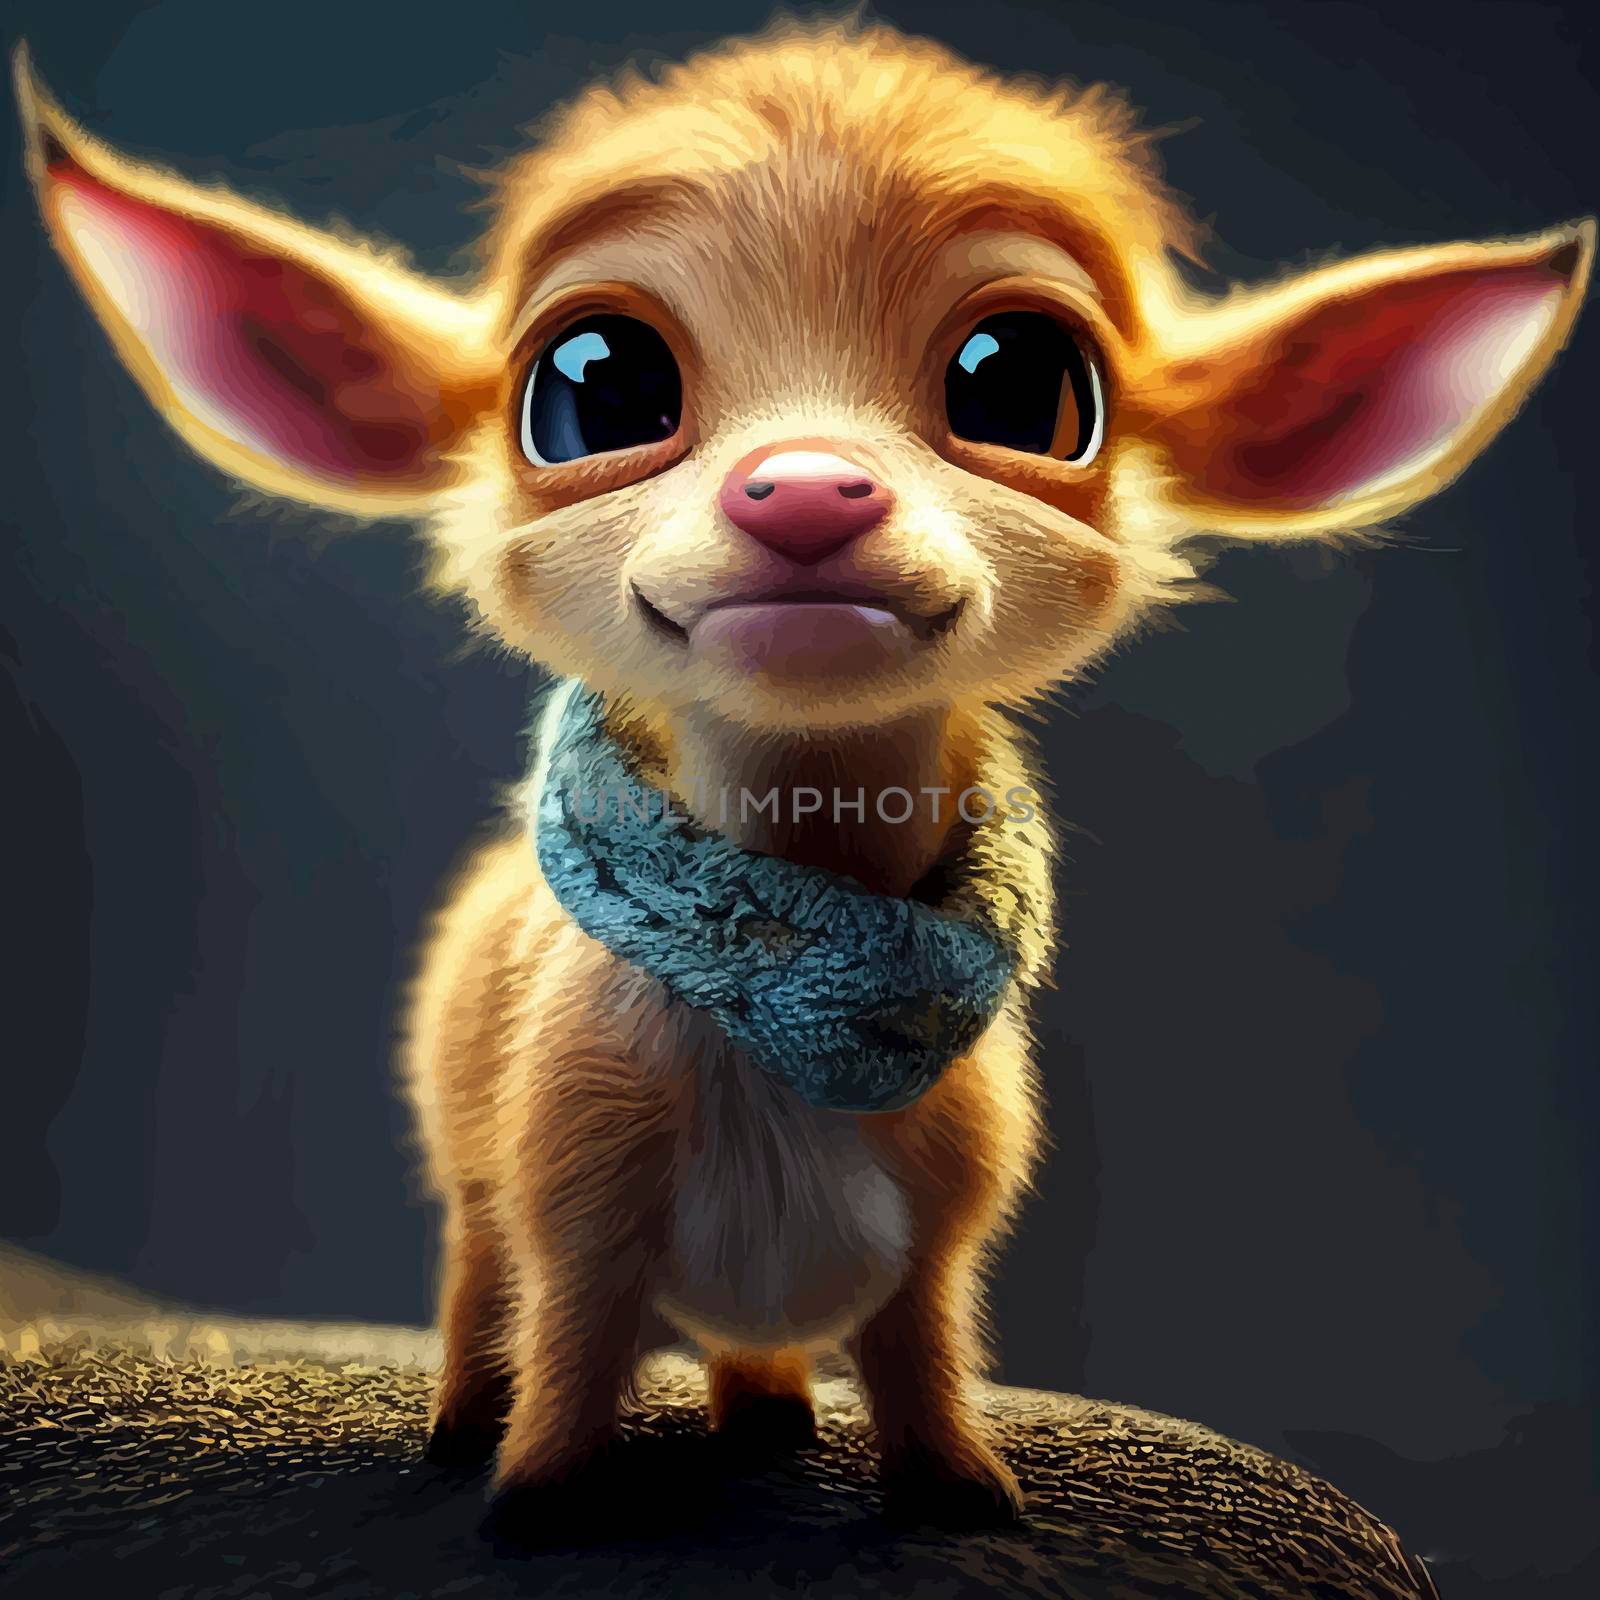 animated illustration of a cute scarf, animated baby scarf portrait by JpRamos